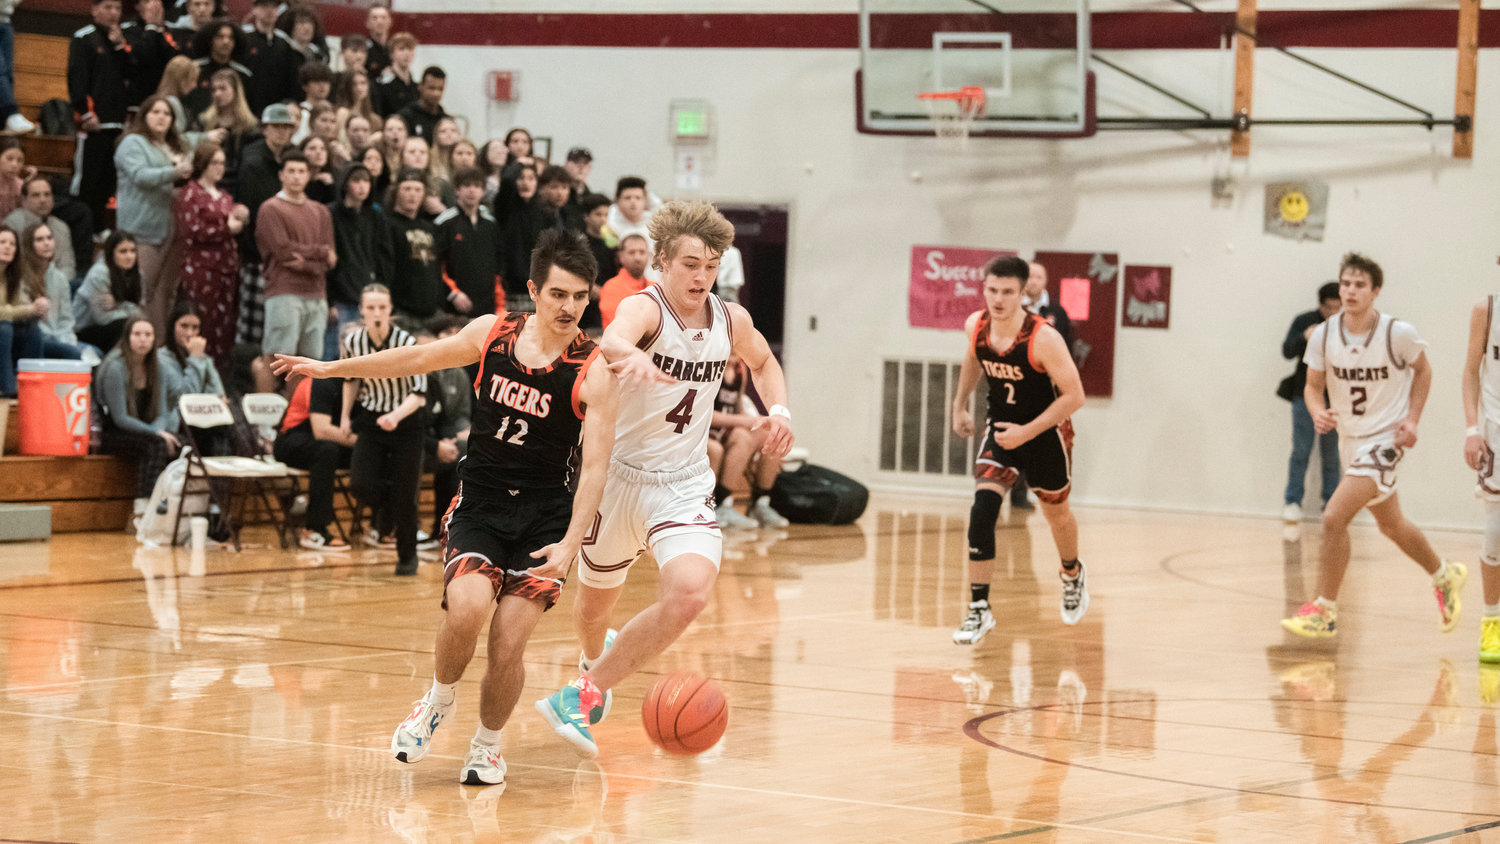 Centralia senior Darrell Neuert (12) and W.F. West sophomore Gage Brumfield (4) scramble for a loose ball during a Tuesday night game in Chehalis.